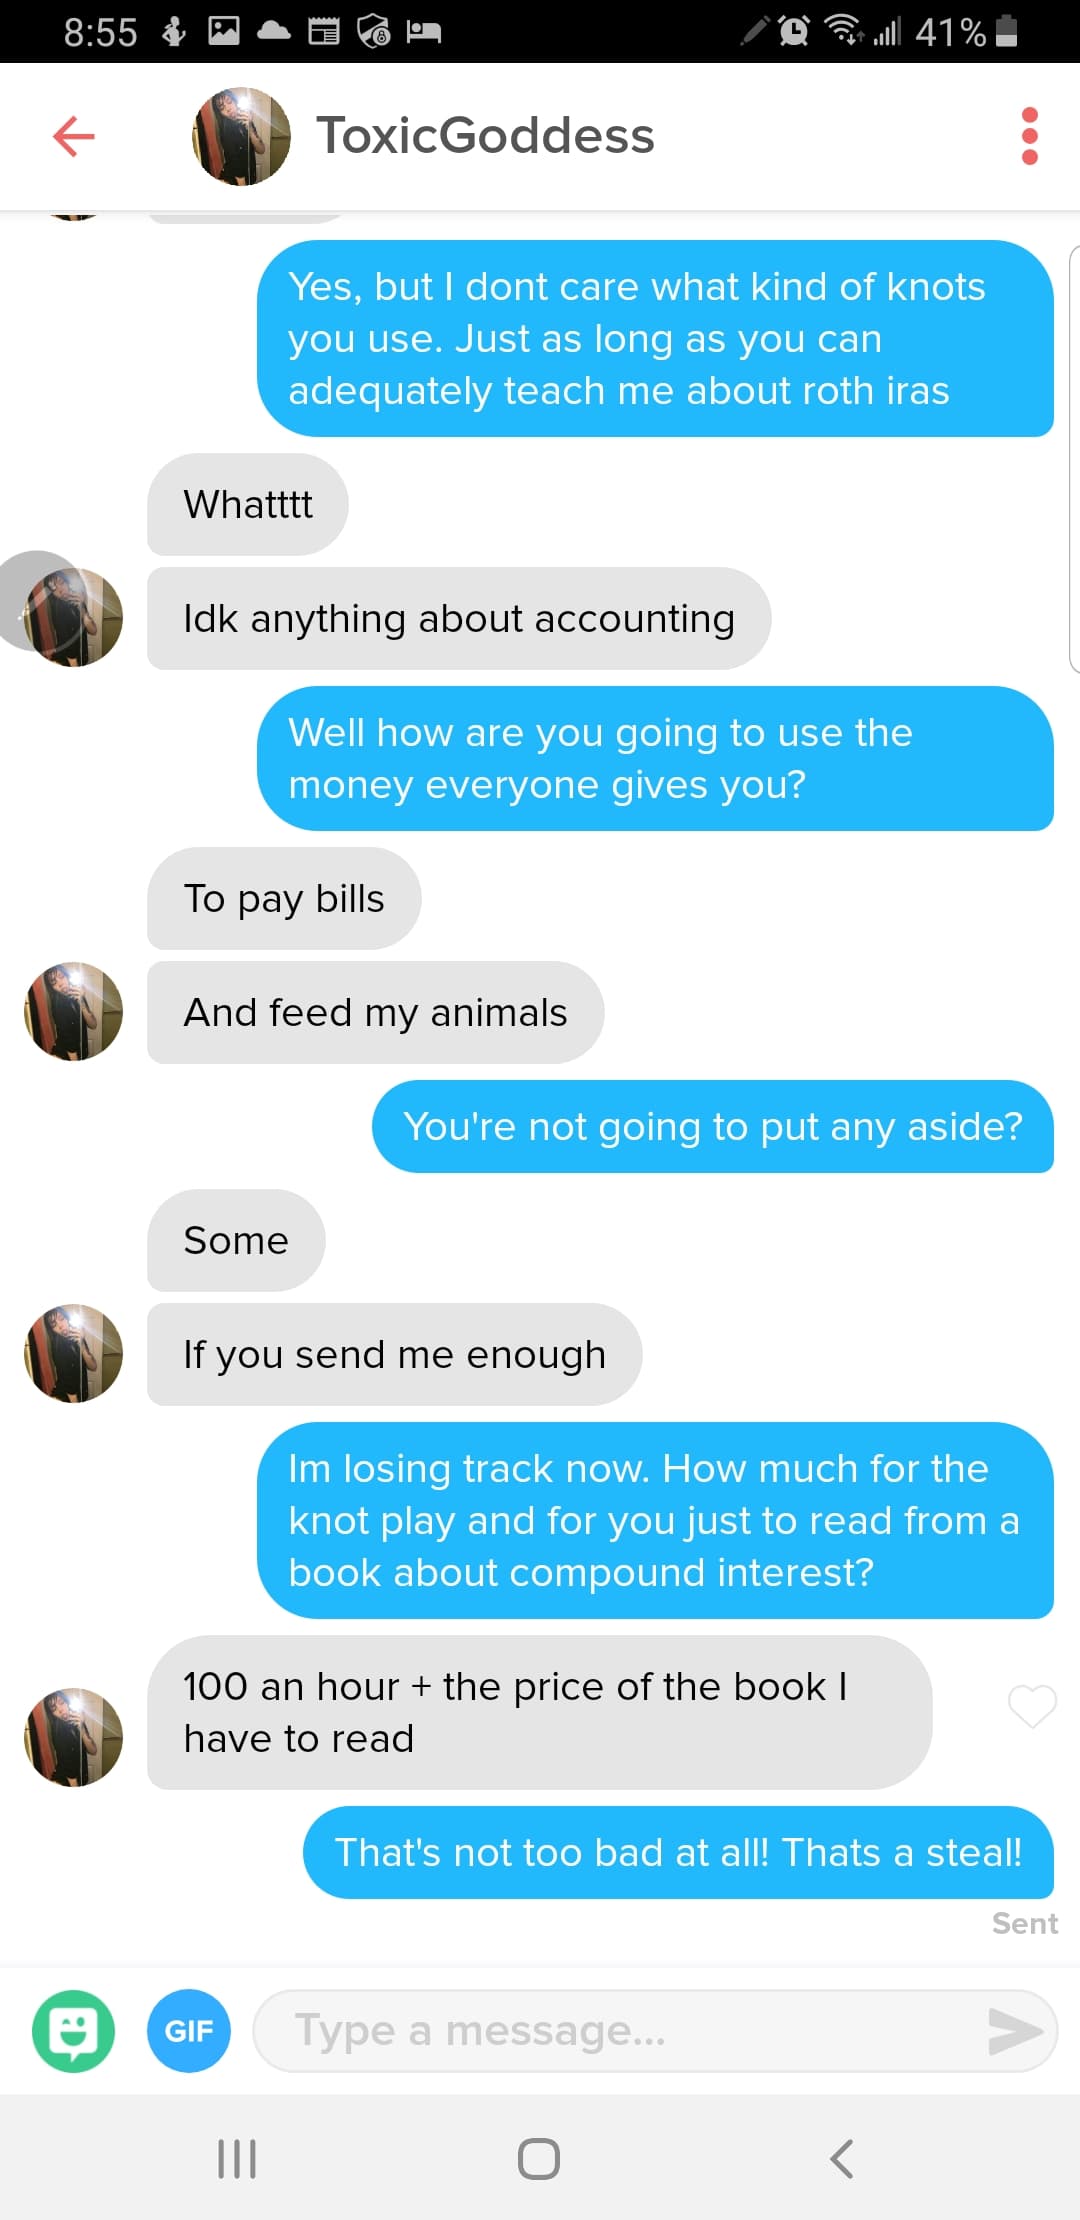 tinder gold digger - & M . O Dell 41%. ToxicGoddess Yes, but I dont care what kind of knots you use. Just as long as you can adequately teach me about roth iras Whatttt Idk anything about accounting Well how are you going to use the money everyone gives y